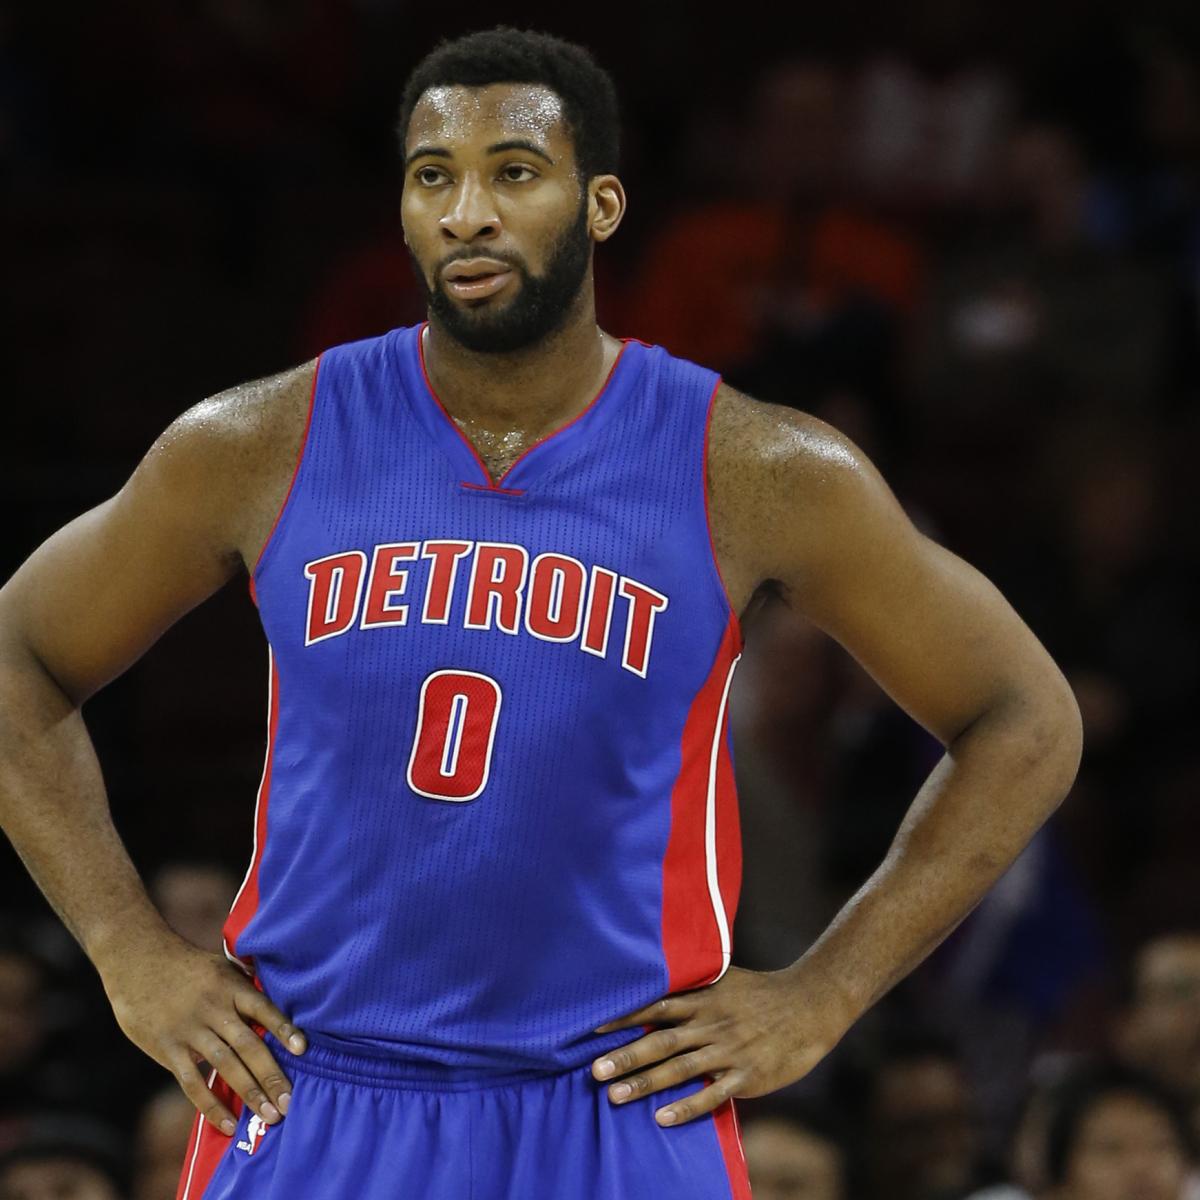 After calling shot, Pistons' Andre Drummond wins NBA rebounding title